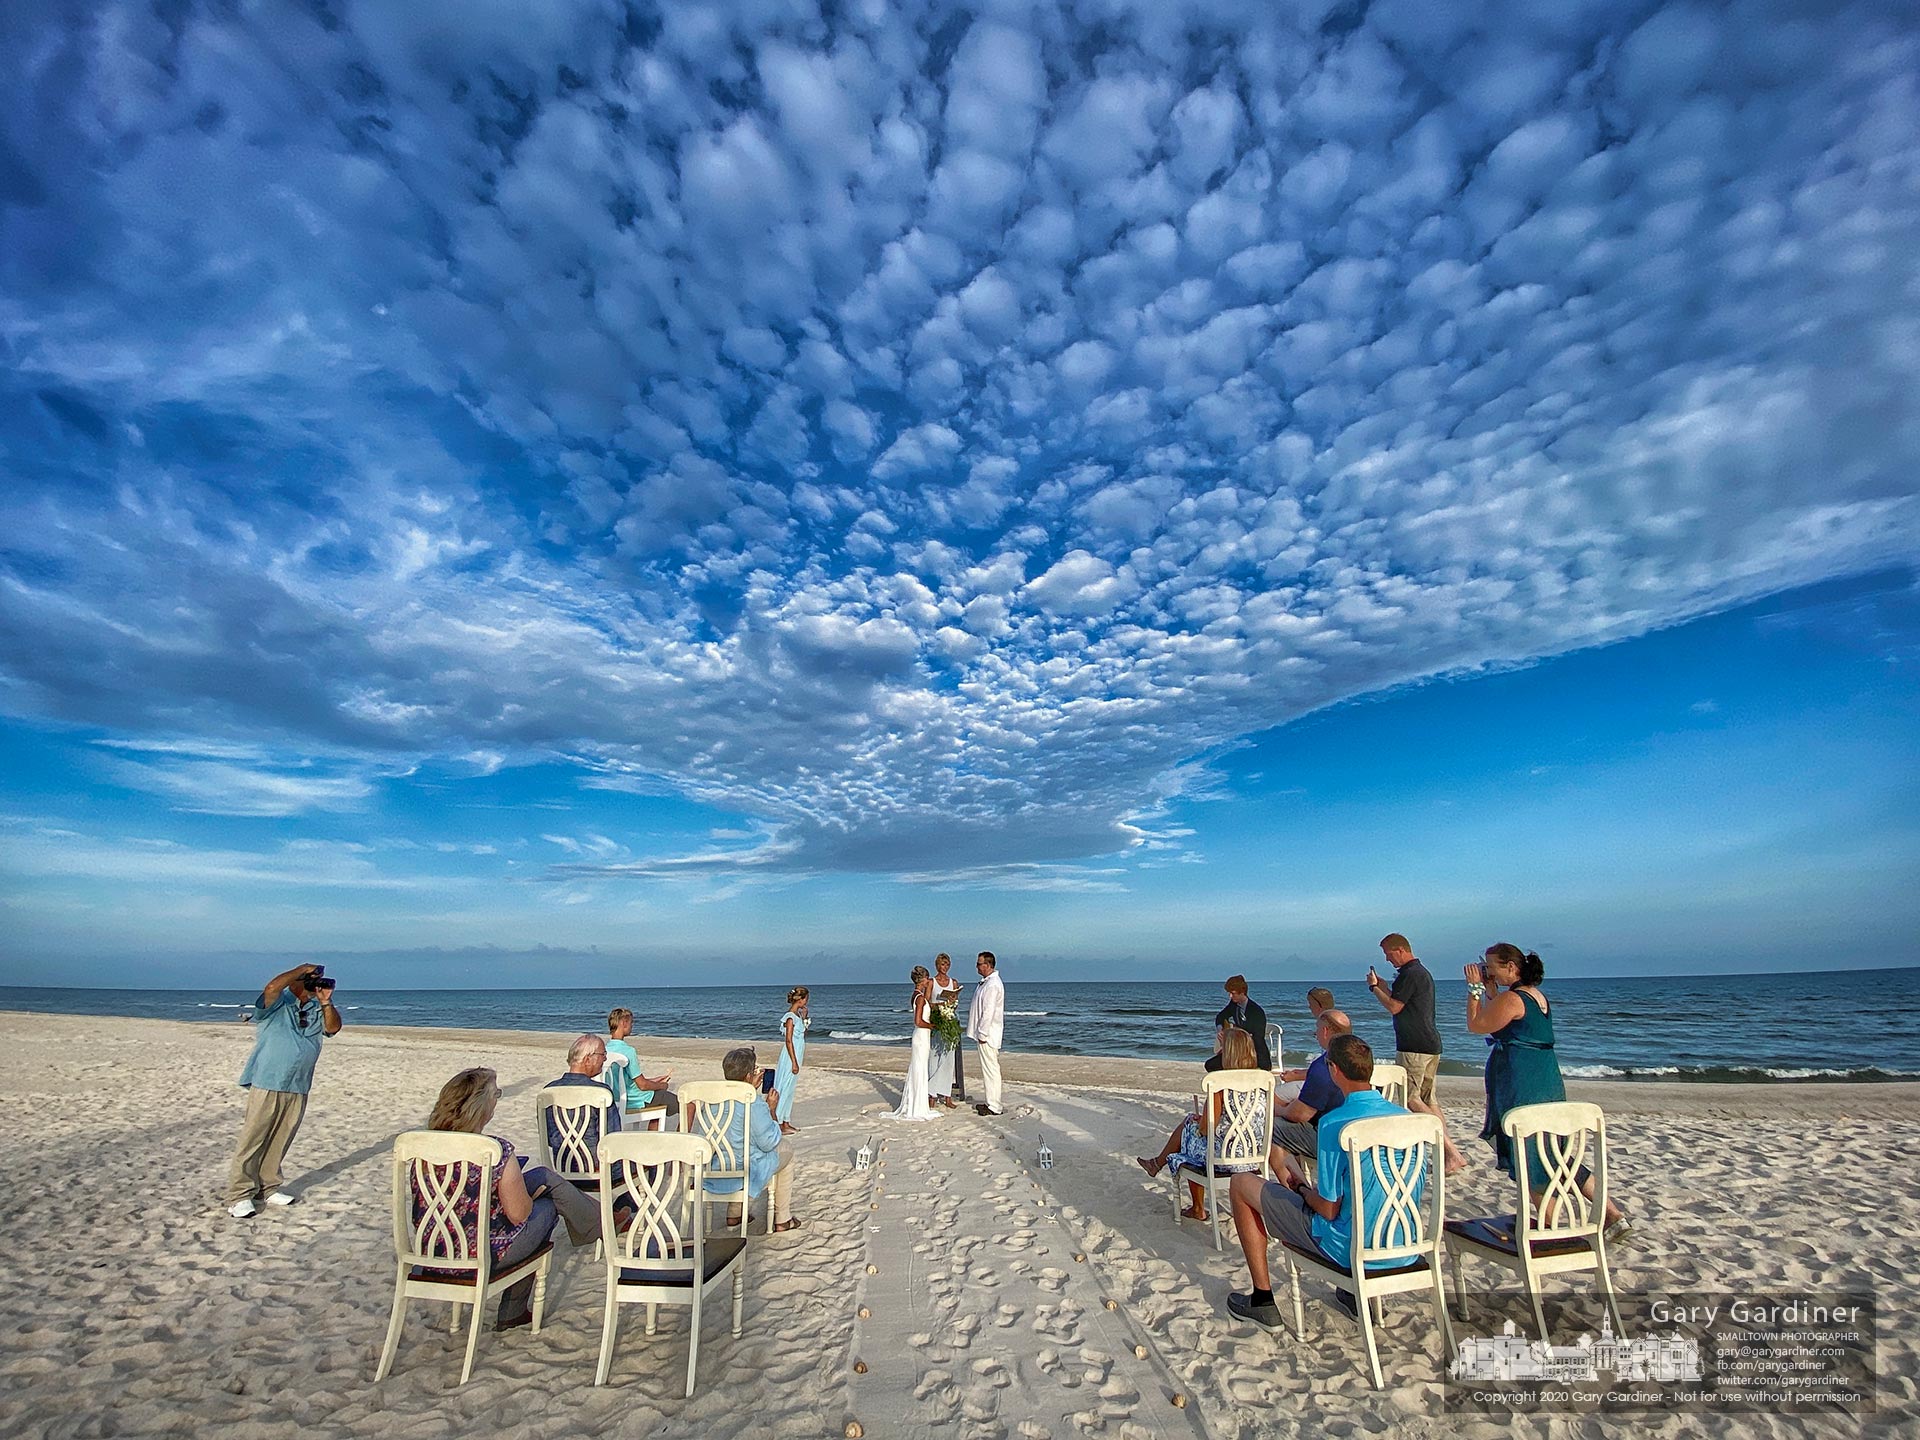 A couple performs their wedding vows at sunset on the beach at St. George Island, FL. My Final Photo for July 14, 2020.